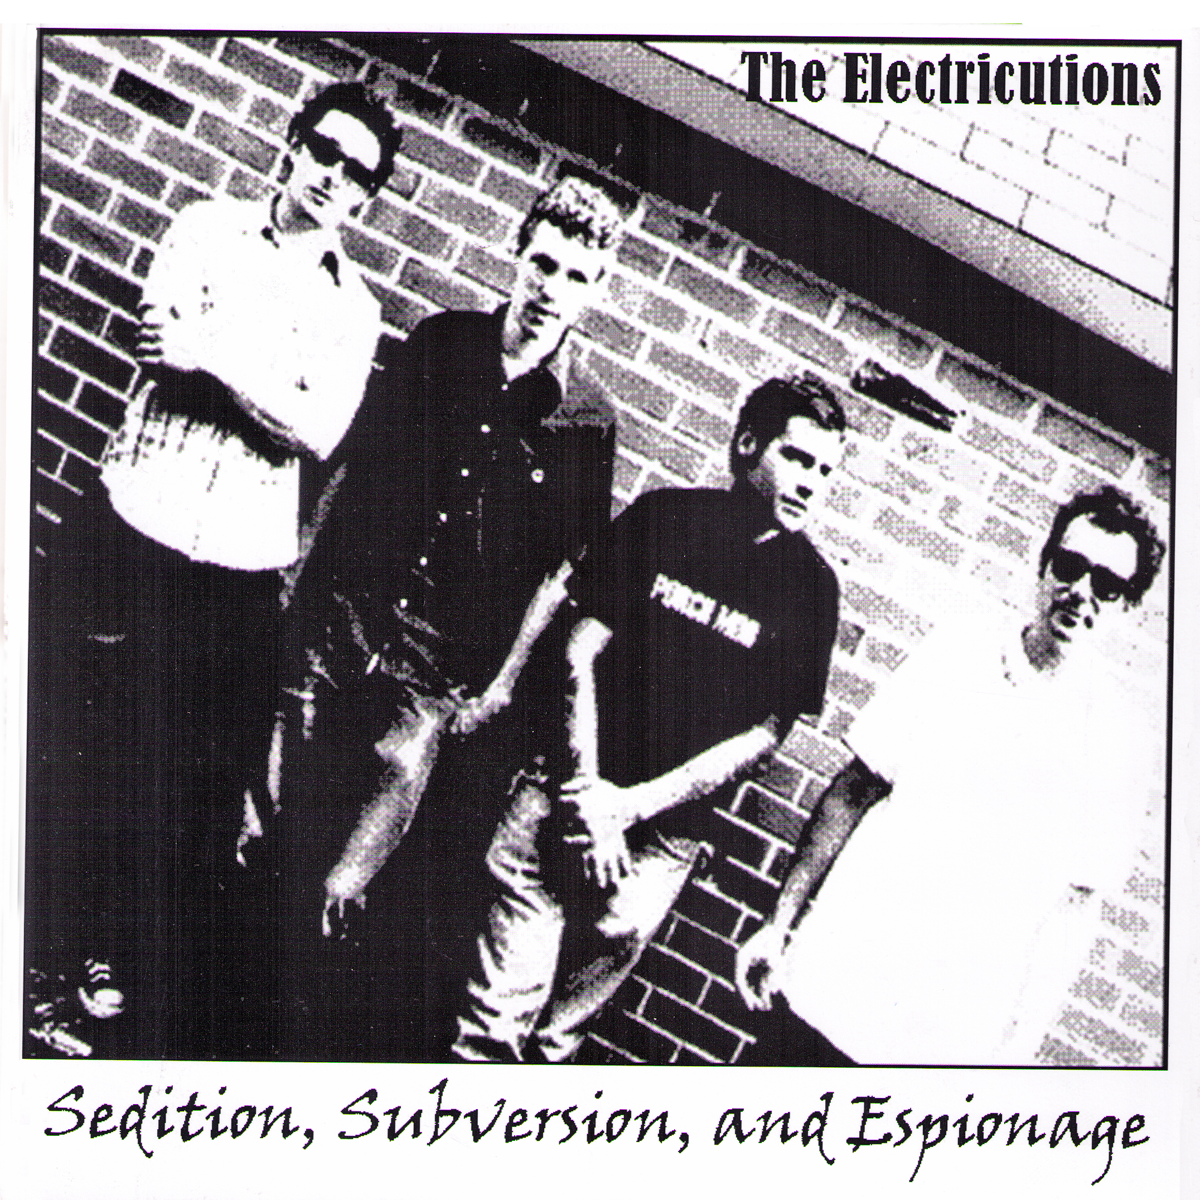 Electricutions- Sedition, Subversion, And Espionage 7" ~CLONE DEFECTS / RARE CLEAR WAX!